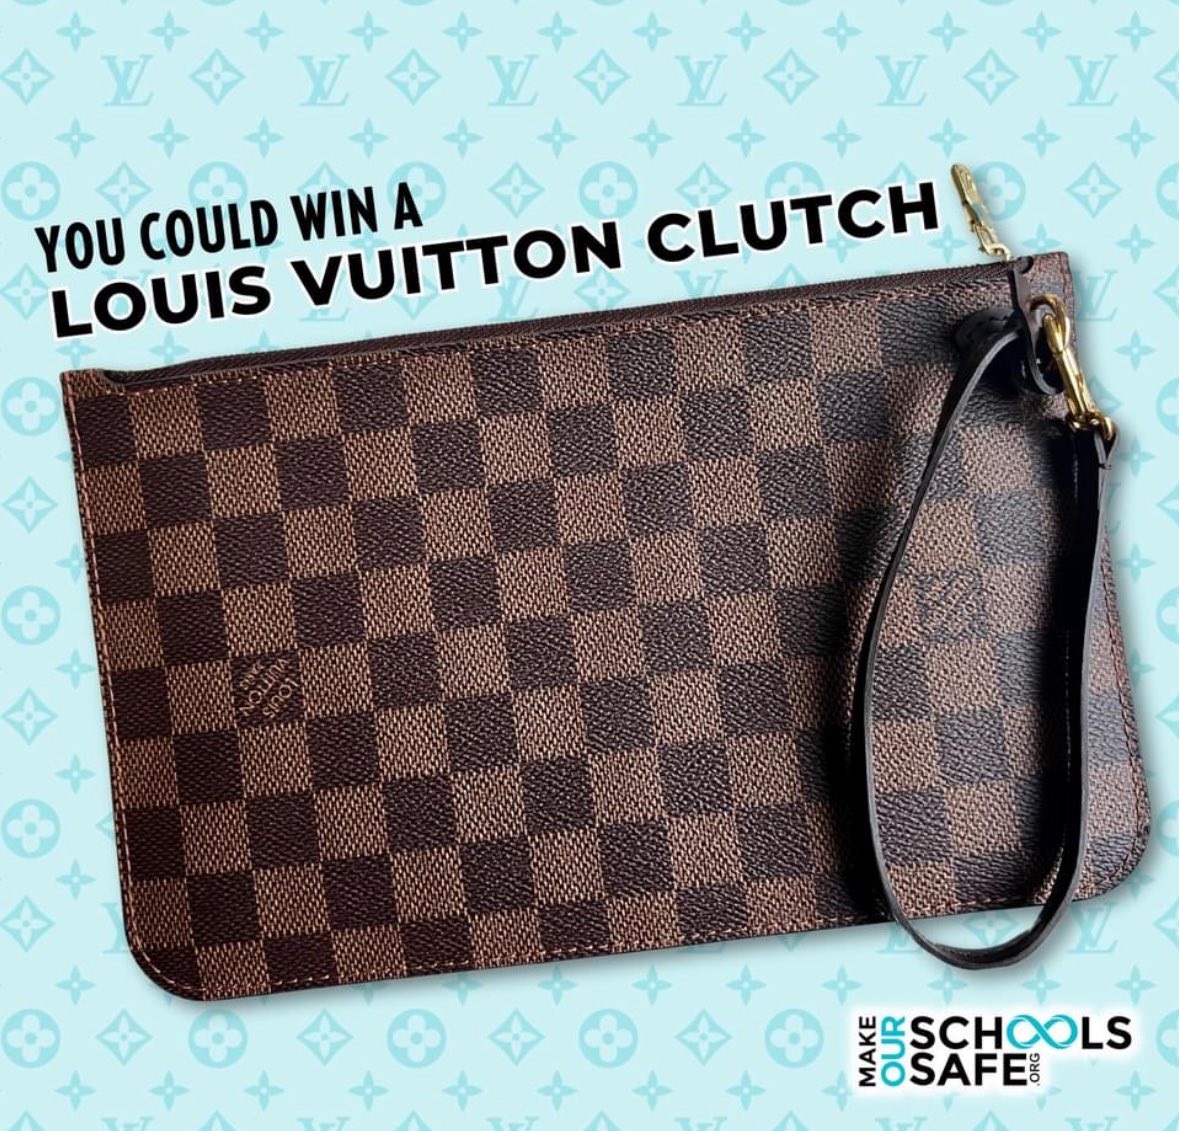 Calling all Louis Vuitton lovers!✨ We’re raffling away an authentic Louis Vuitton clutch and dust bag! Visit bit.ly/LFALVRaffle to enter to win! Make Our Schools Safe will draw a winner LIVE at our Live for Alyssa Gala. Make sure to enter before May 18th for your chance to…